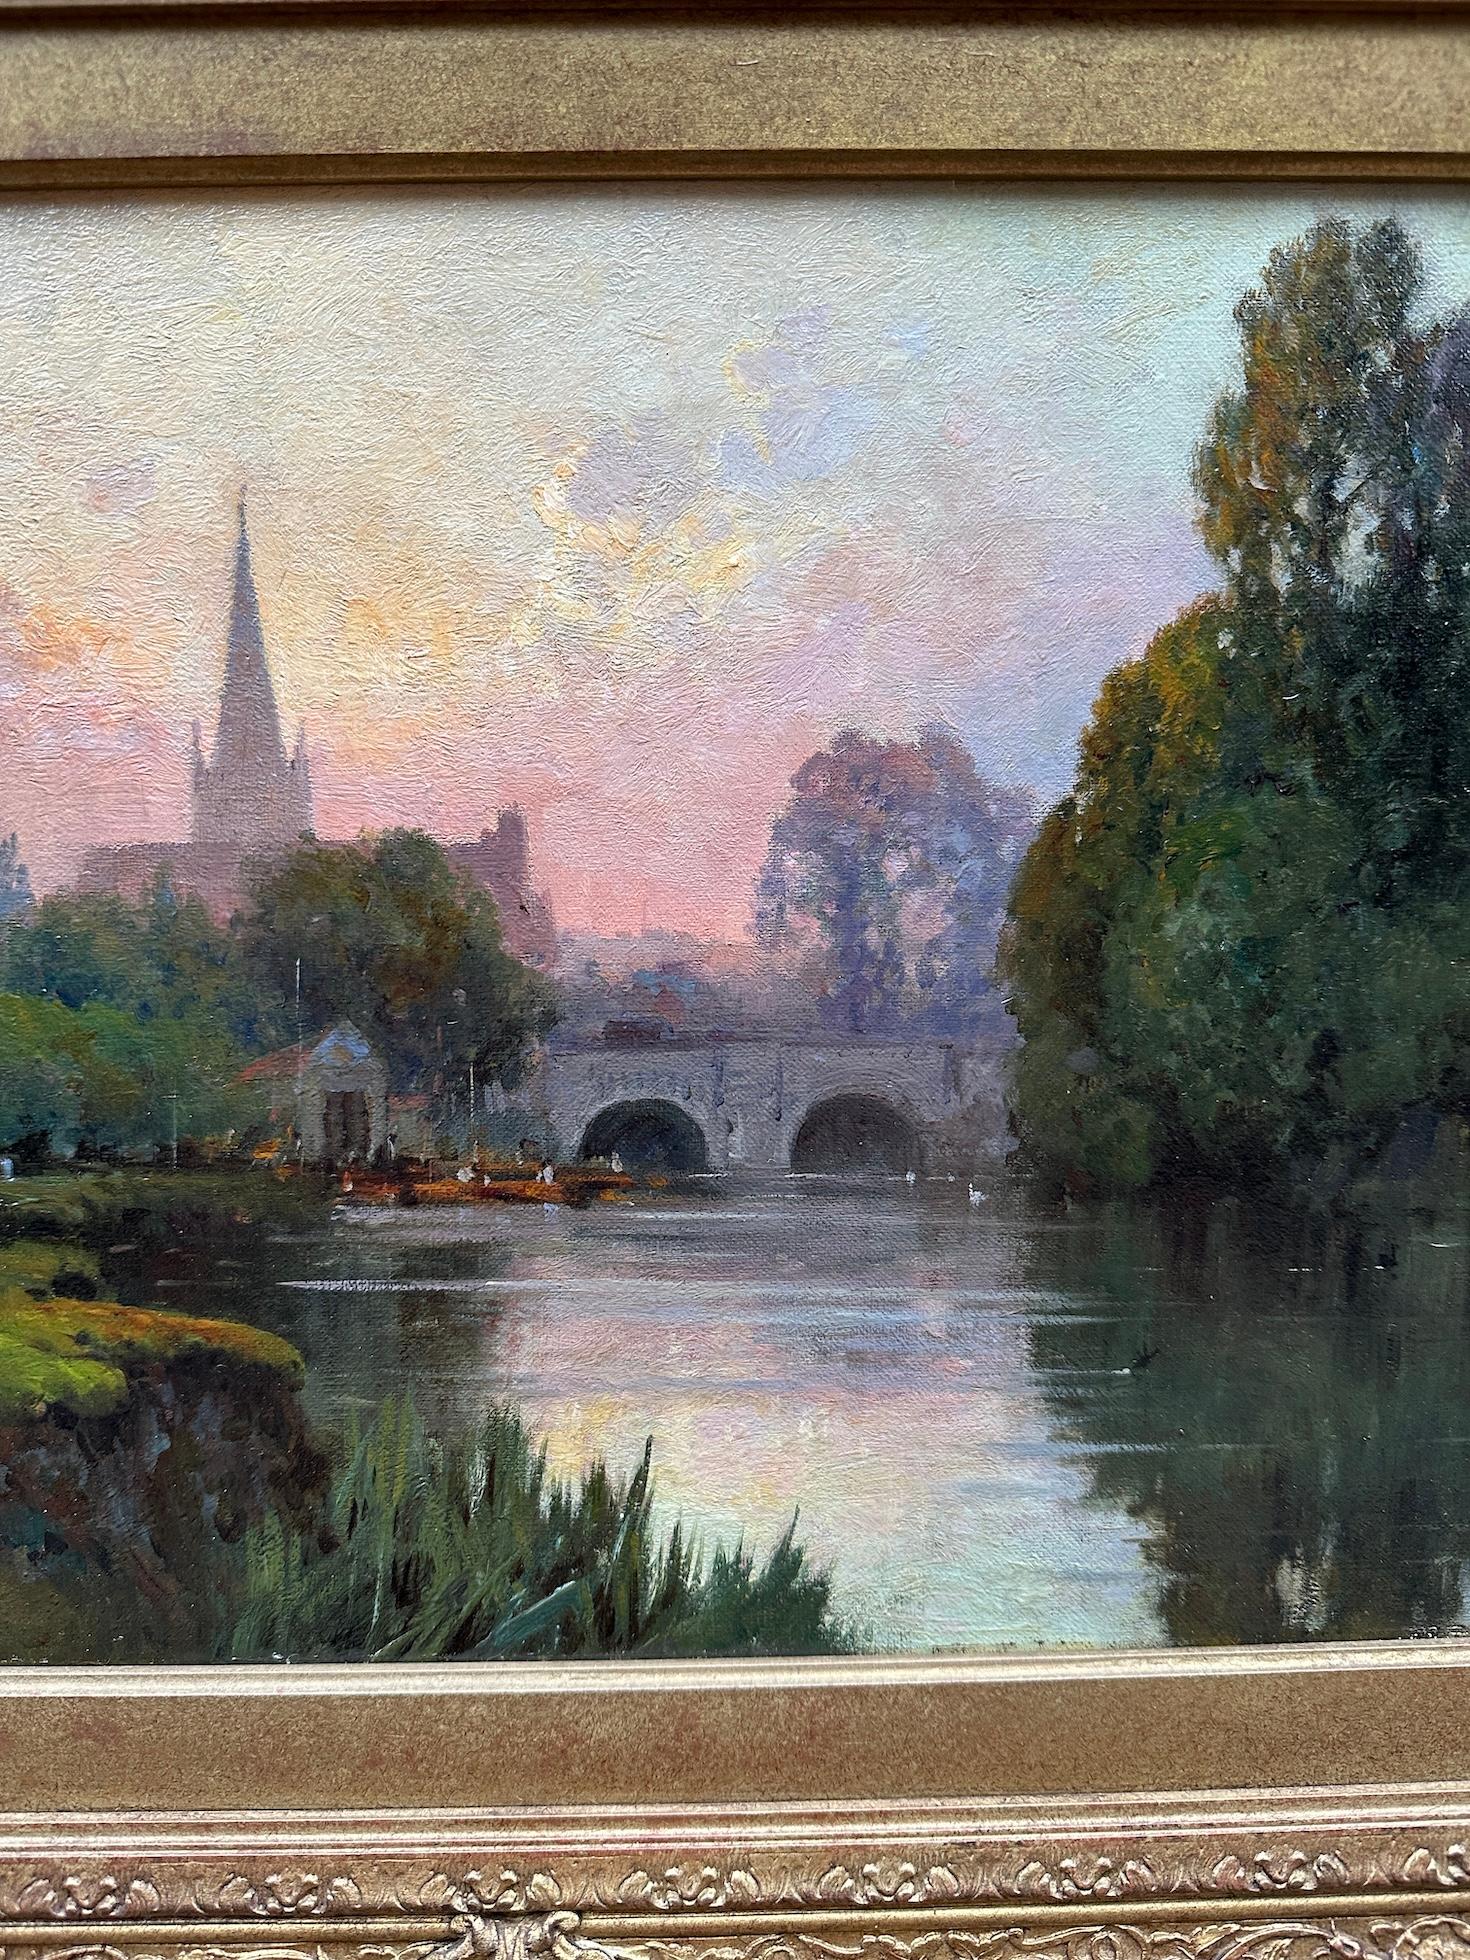 English River landscape, with Church and River at Sunset, Abingdon on the Thames - Impressionist Painting by Alfred de Breanski Jnr.